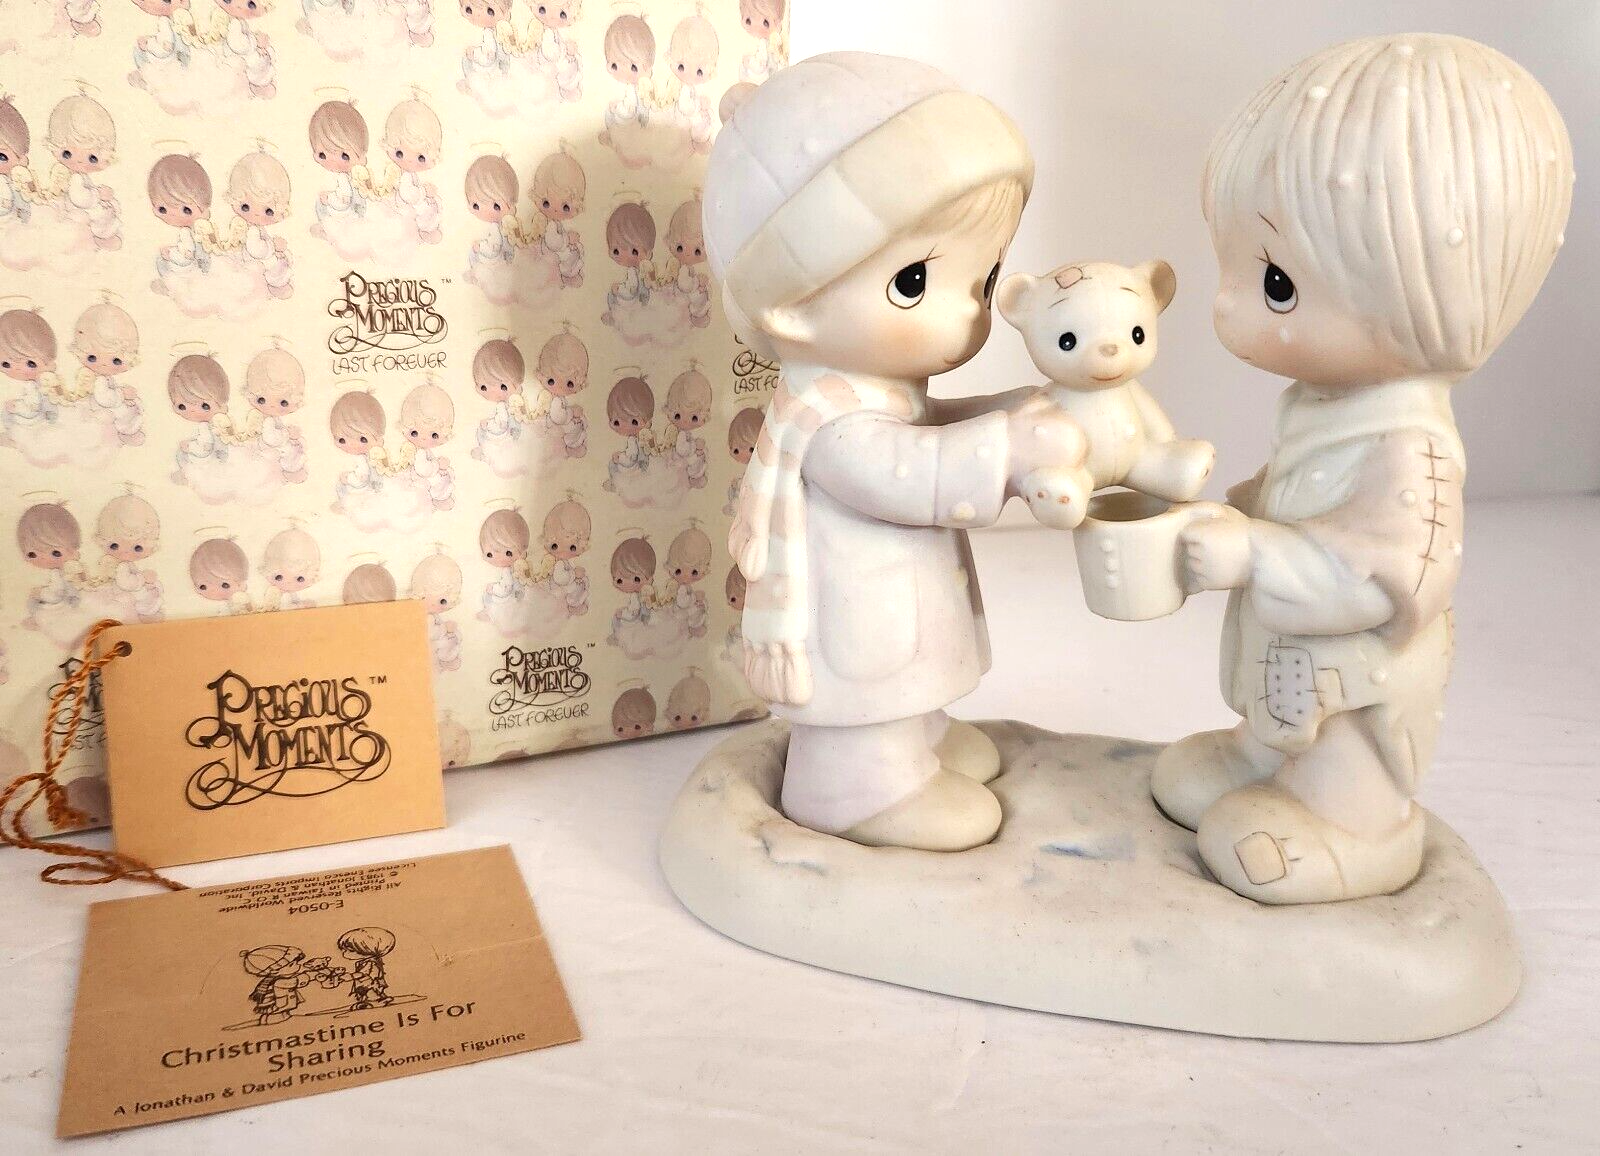 Precious Moments CHRISTMASTIME IS FOR SHARING Figure E-0504 Retired 1983 5" Tall - $19.95